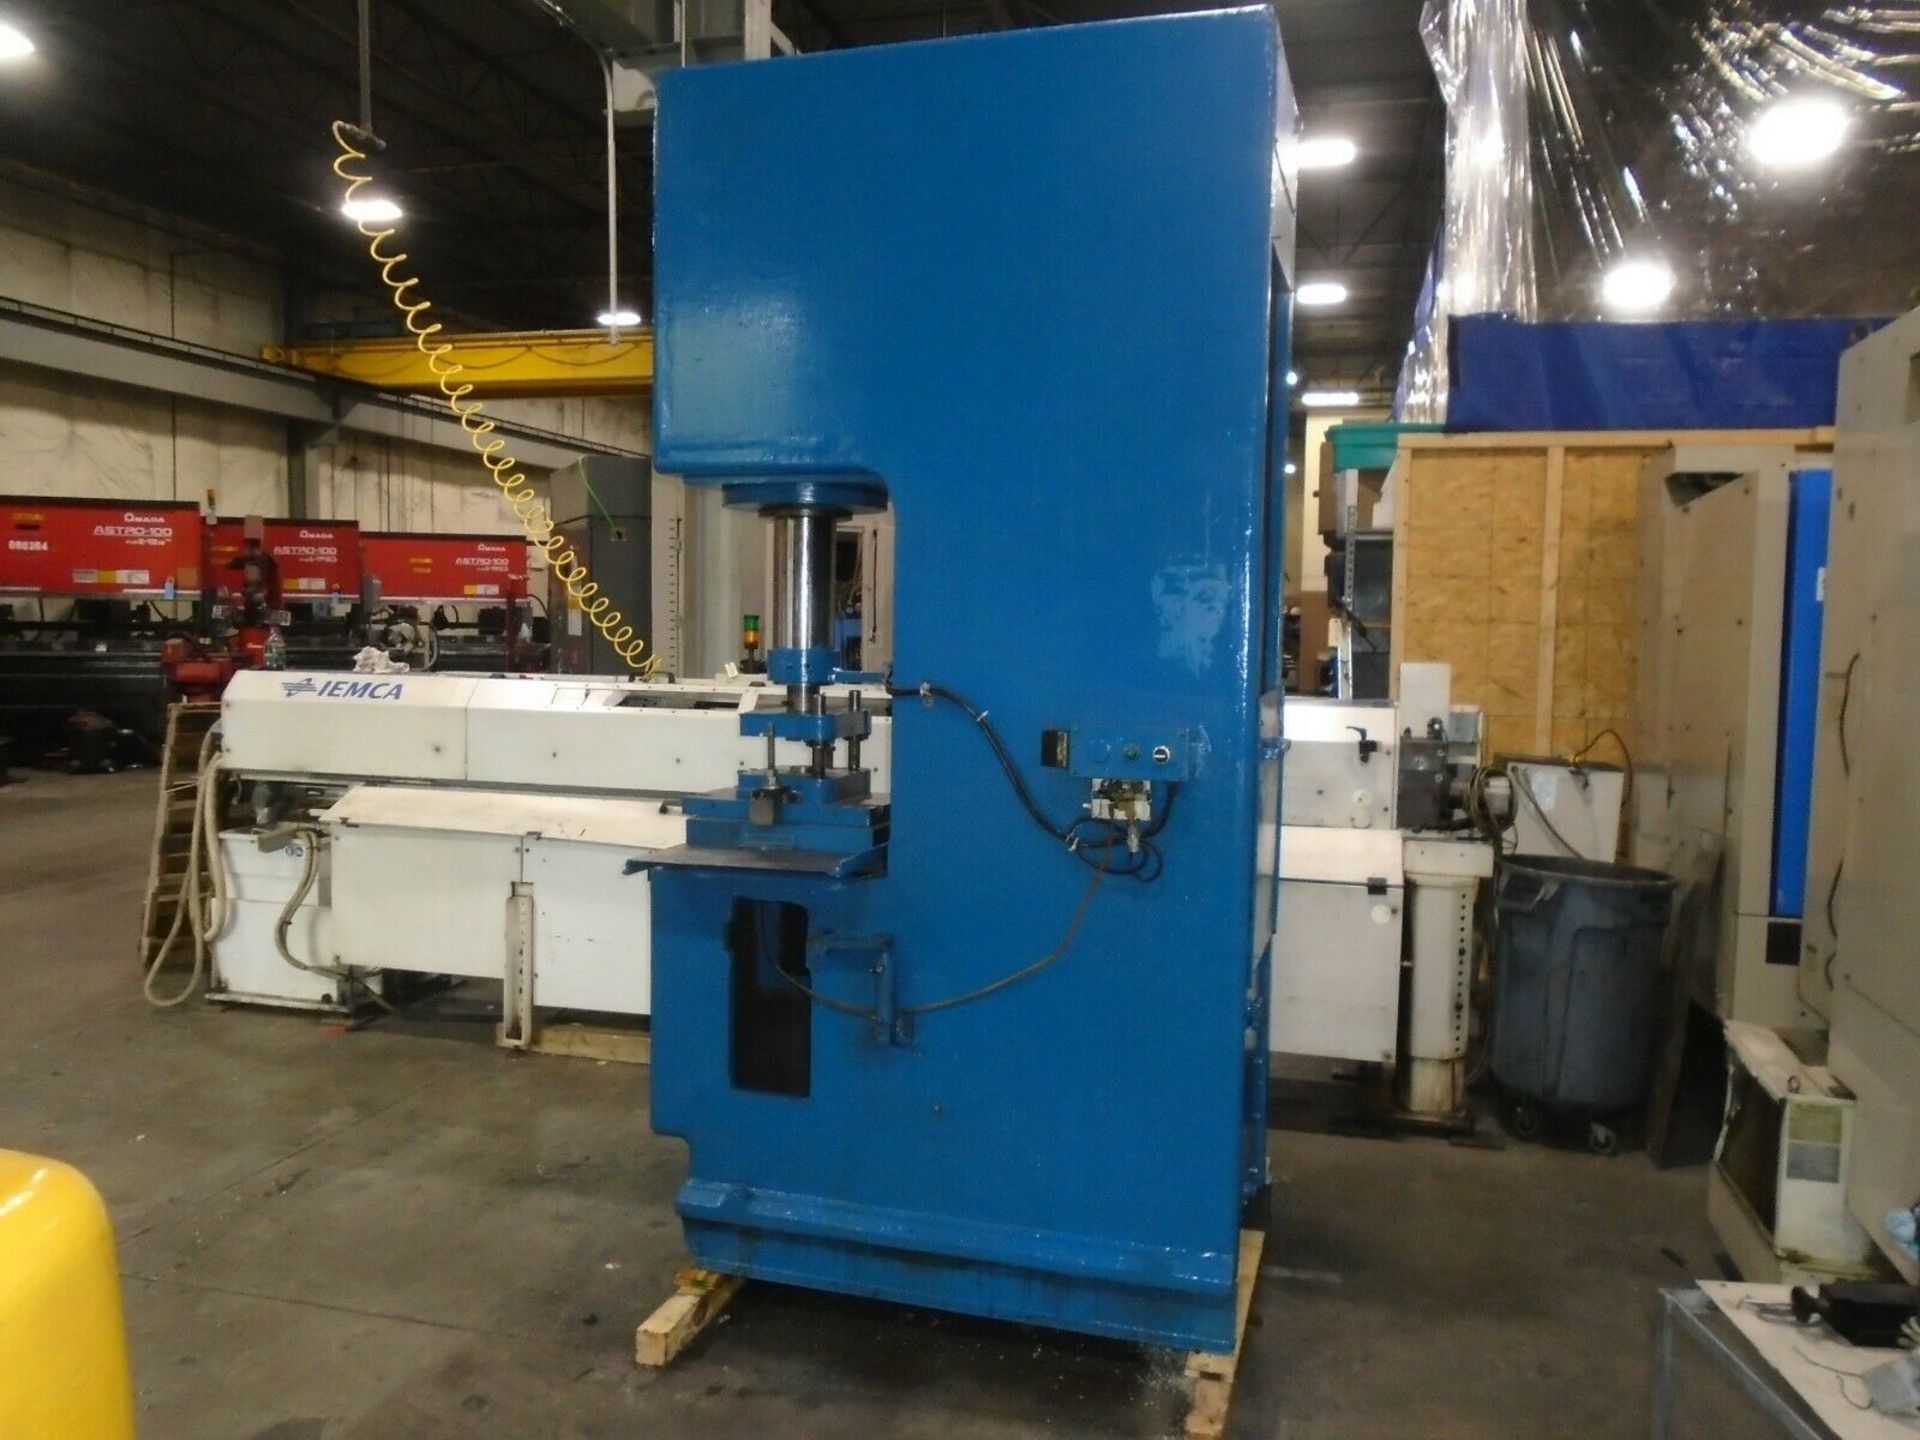 Denison 50 Ton Hydraulic Press With 18 Die Sets - Image 2 of 10